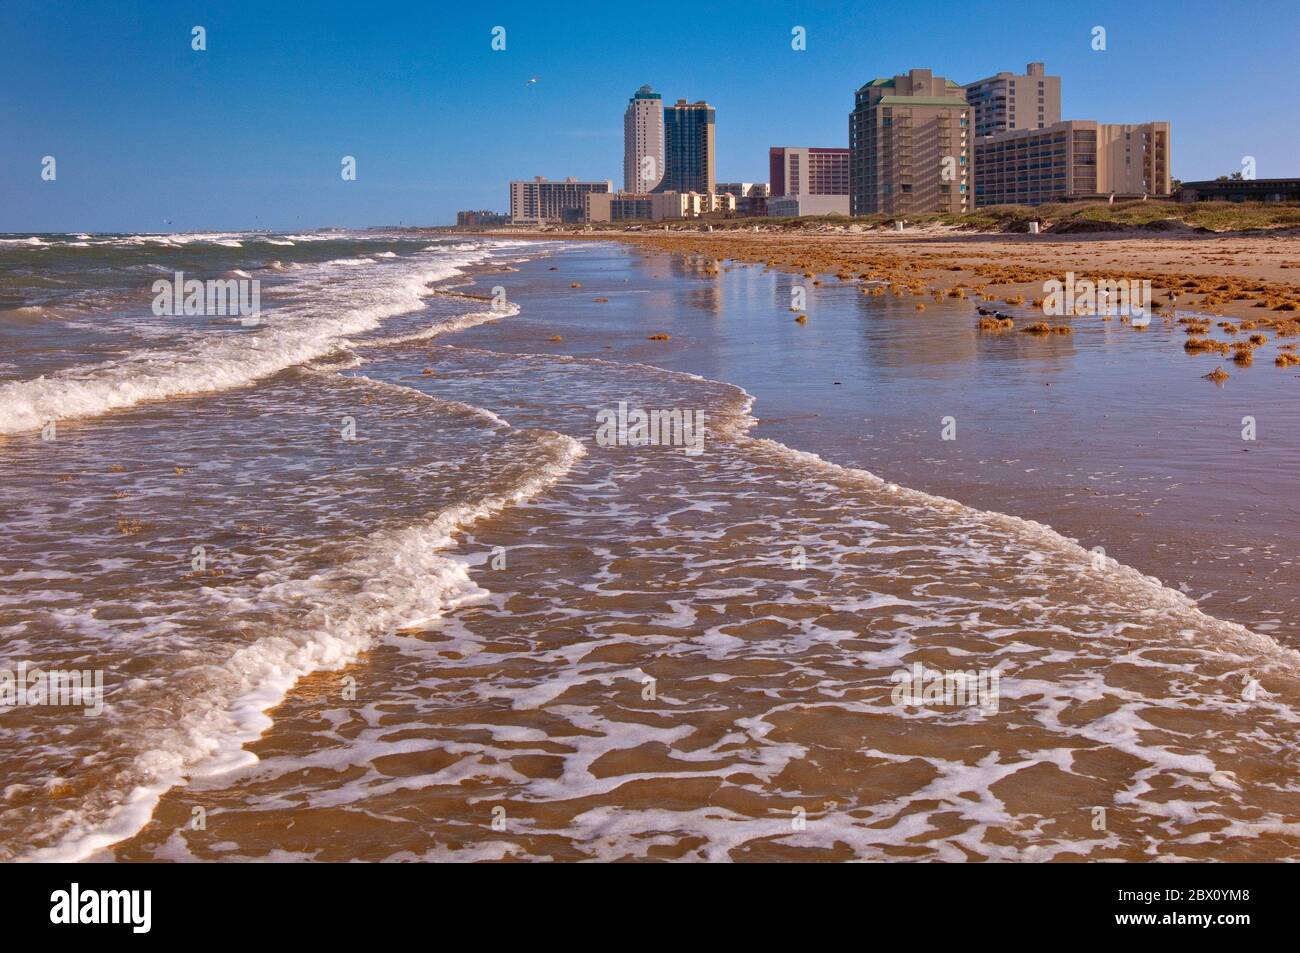 Condominium and hotel towers over Gulf of Mexico beach at South Padre Island, Texas, USA Stock Photo